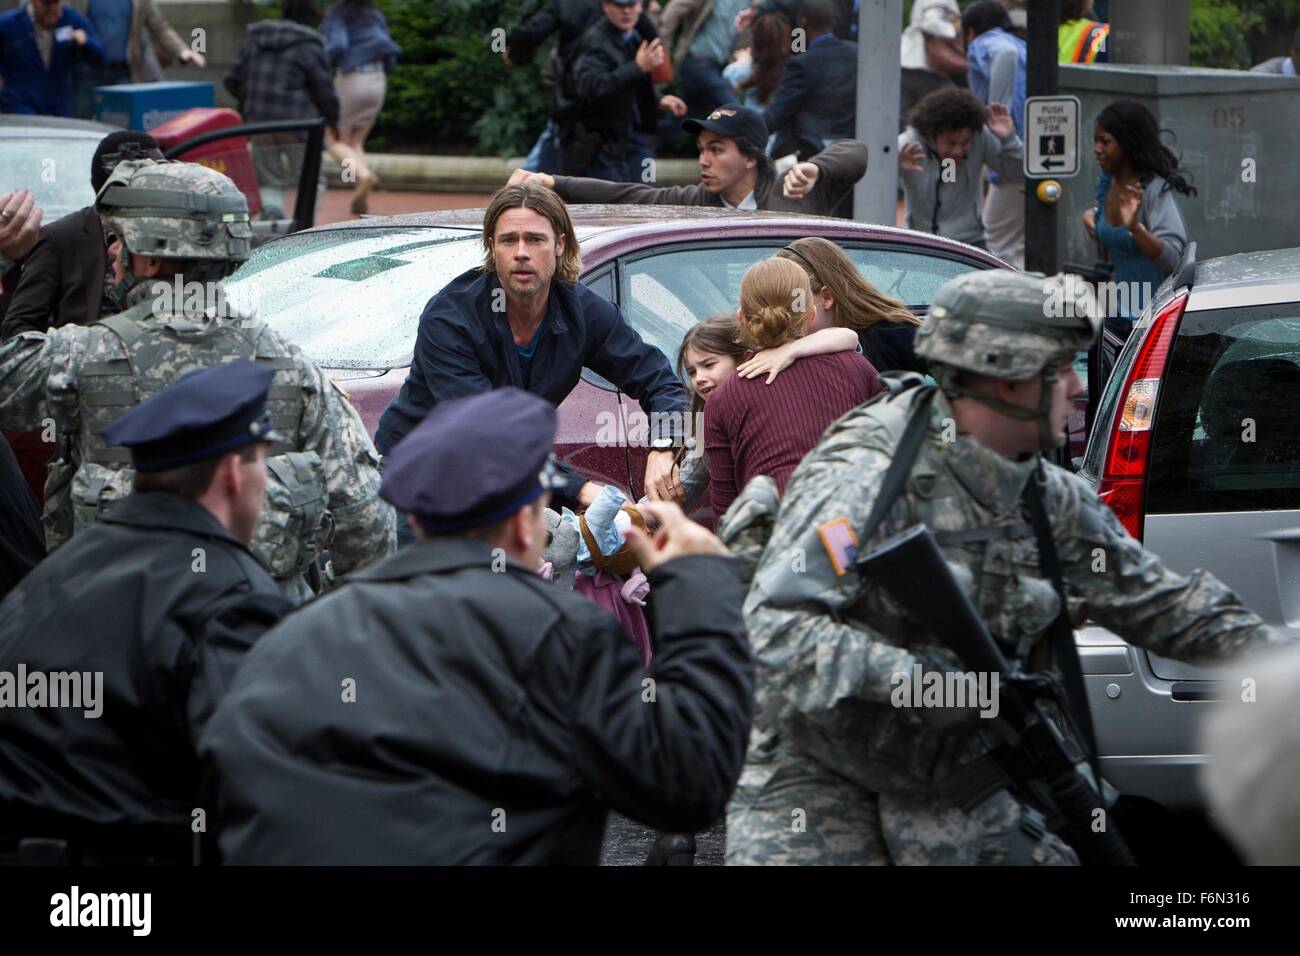 RELEASE DATE: June 21, 2013 TITLE: World War Z STUDIO: Paramount Pictures DIRECTOR: Marc Forster PLOT: A U.N. employee is racing against time and fate, as he travels the world trying to stop the outbreak of a deadly Zombie pandemic PICTURED: BRAD PITT as Gerry Lane  (Credit: c ParamountPictures/Entertainment Pictures) Stock Photo